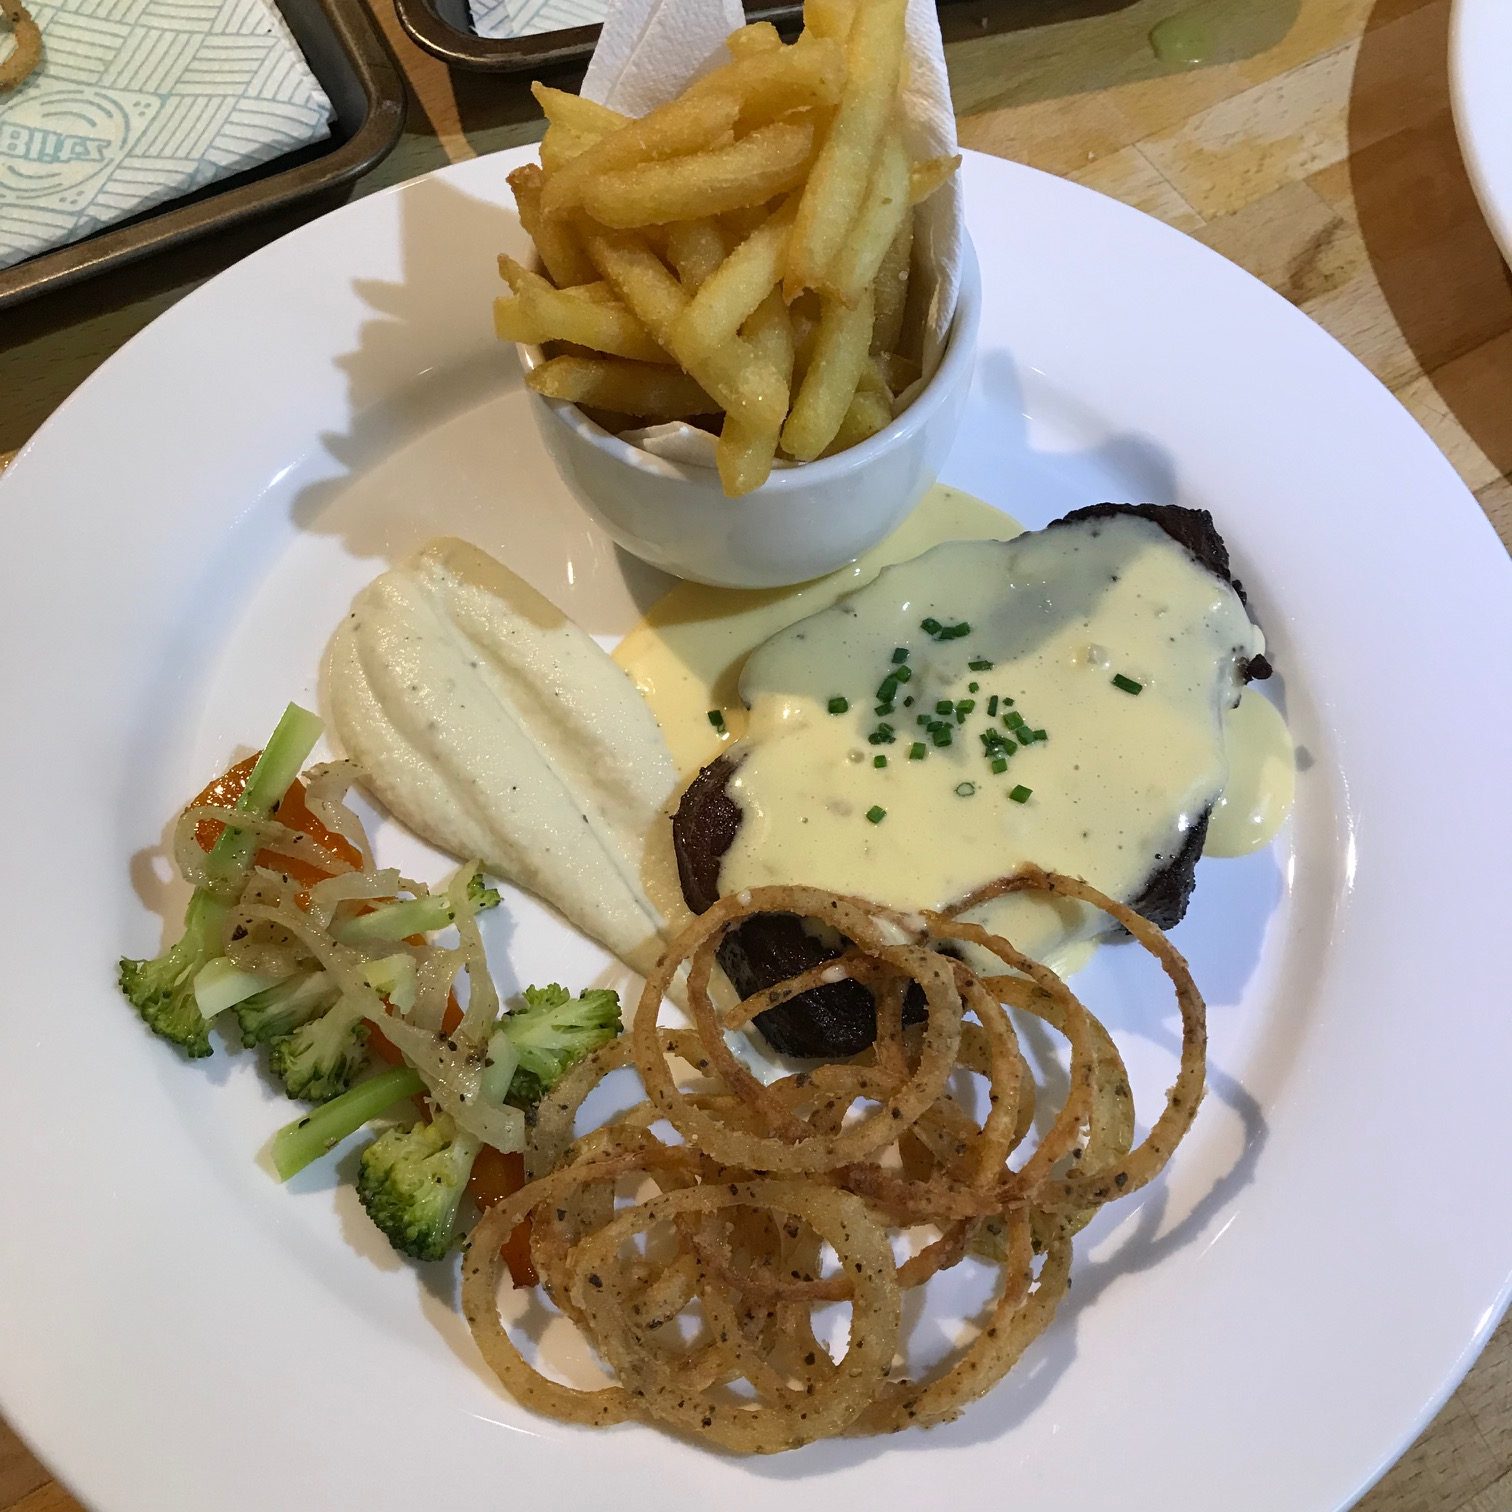 20190809 - Fillet Steak with Béarnaise Sauce & Black Pepper Onion Rings